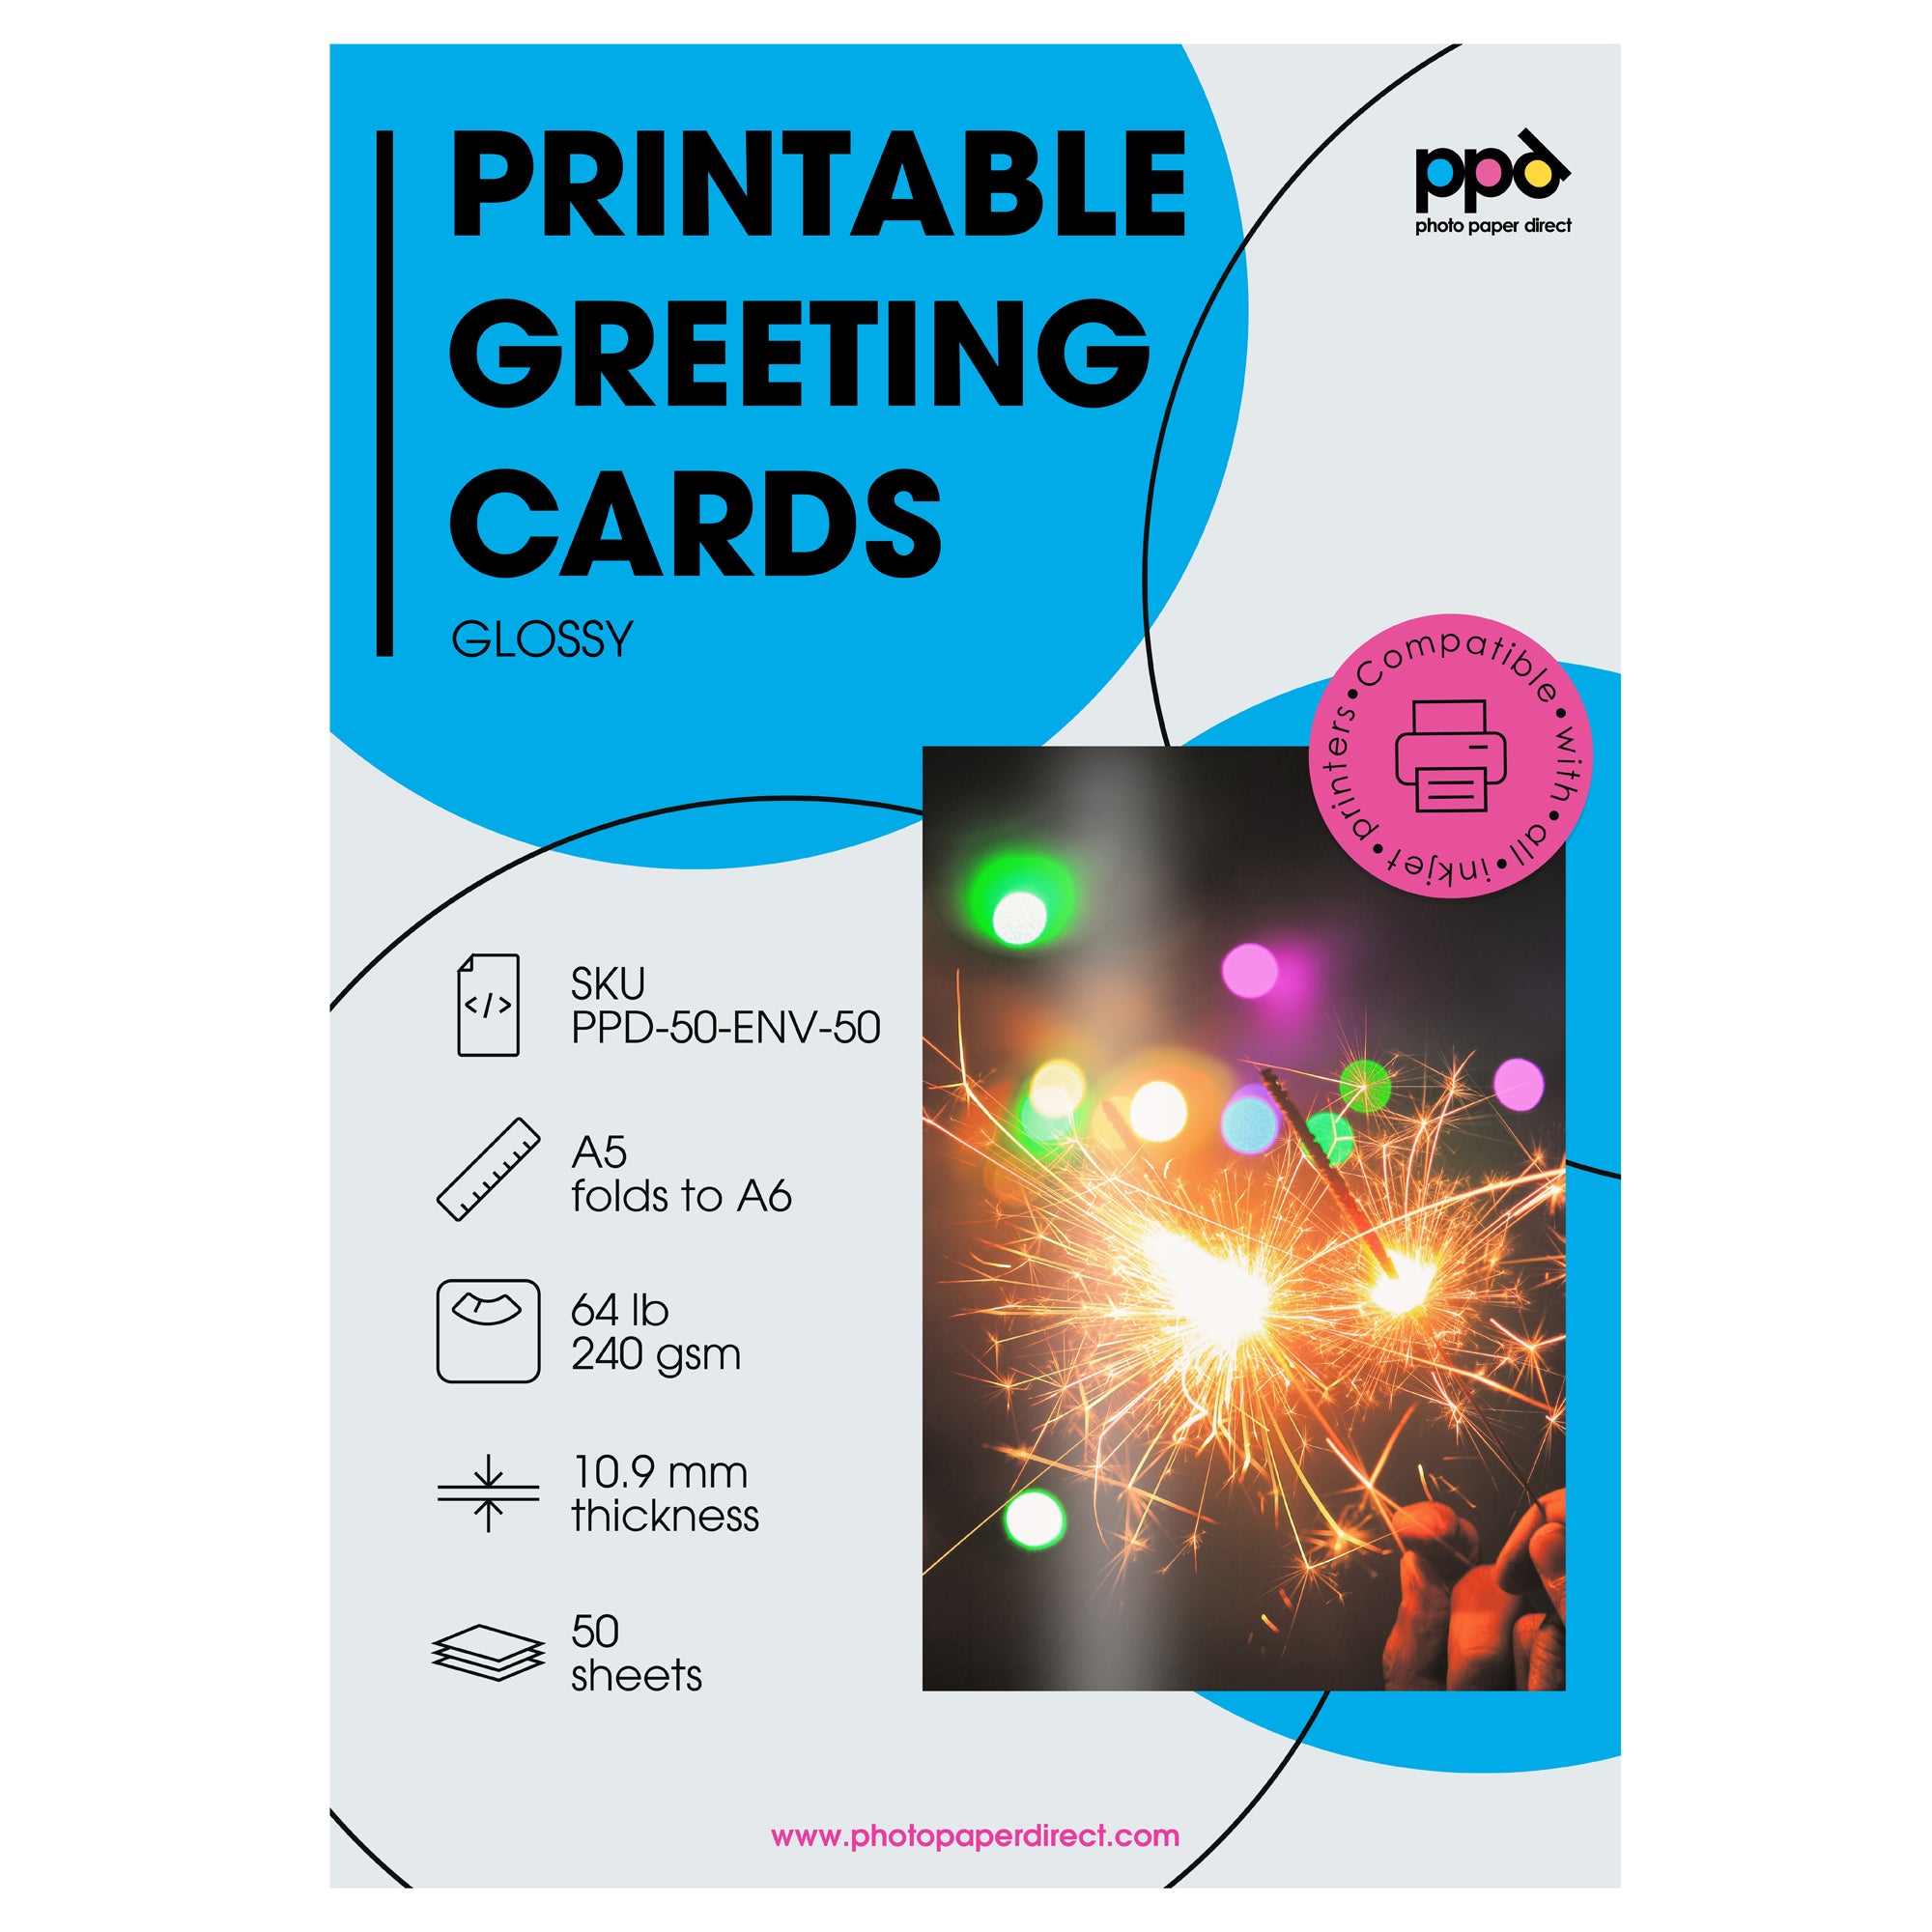 PPD Inkjet Printable Greeting Cards A5 Pre-Scored To A6 260gsm Gloss Inc Envelopes PPD-50-ENV-50